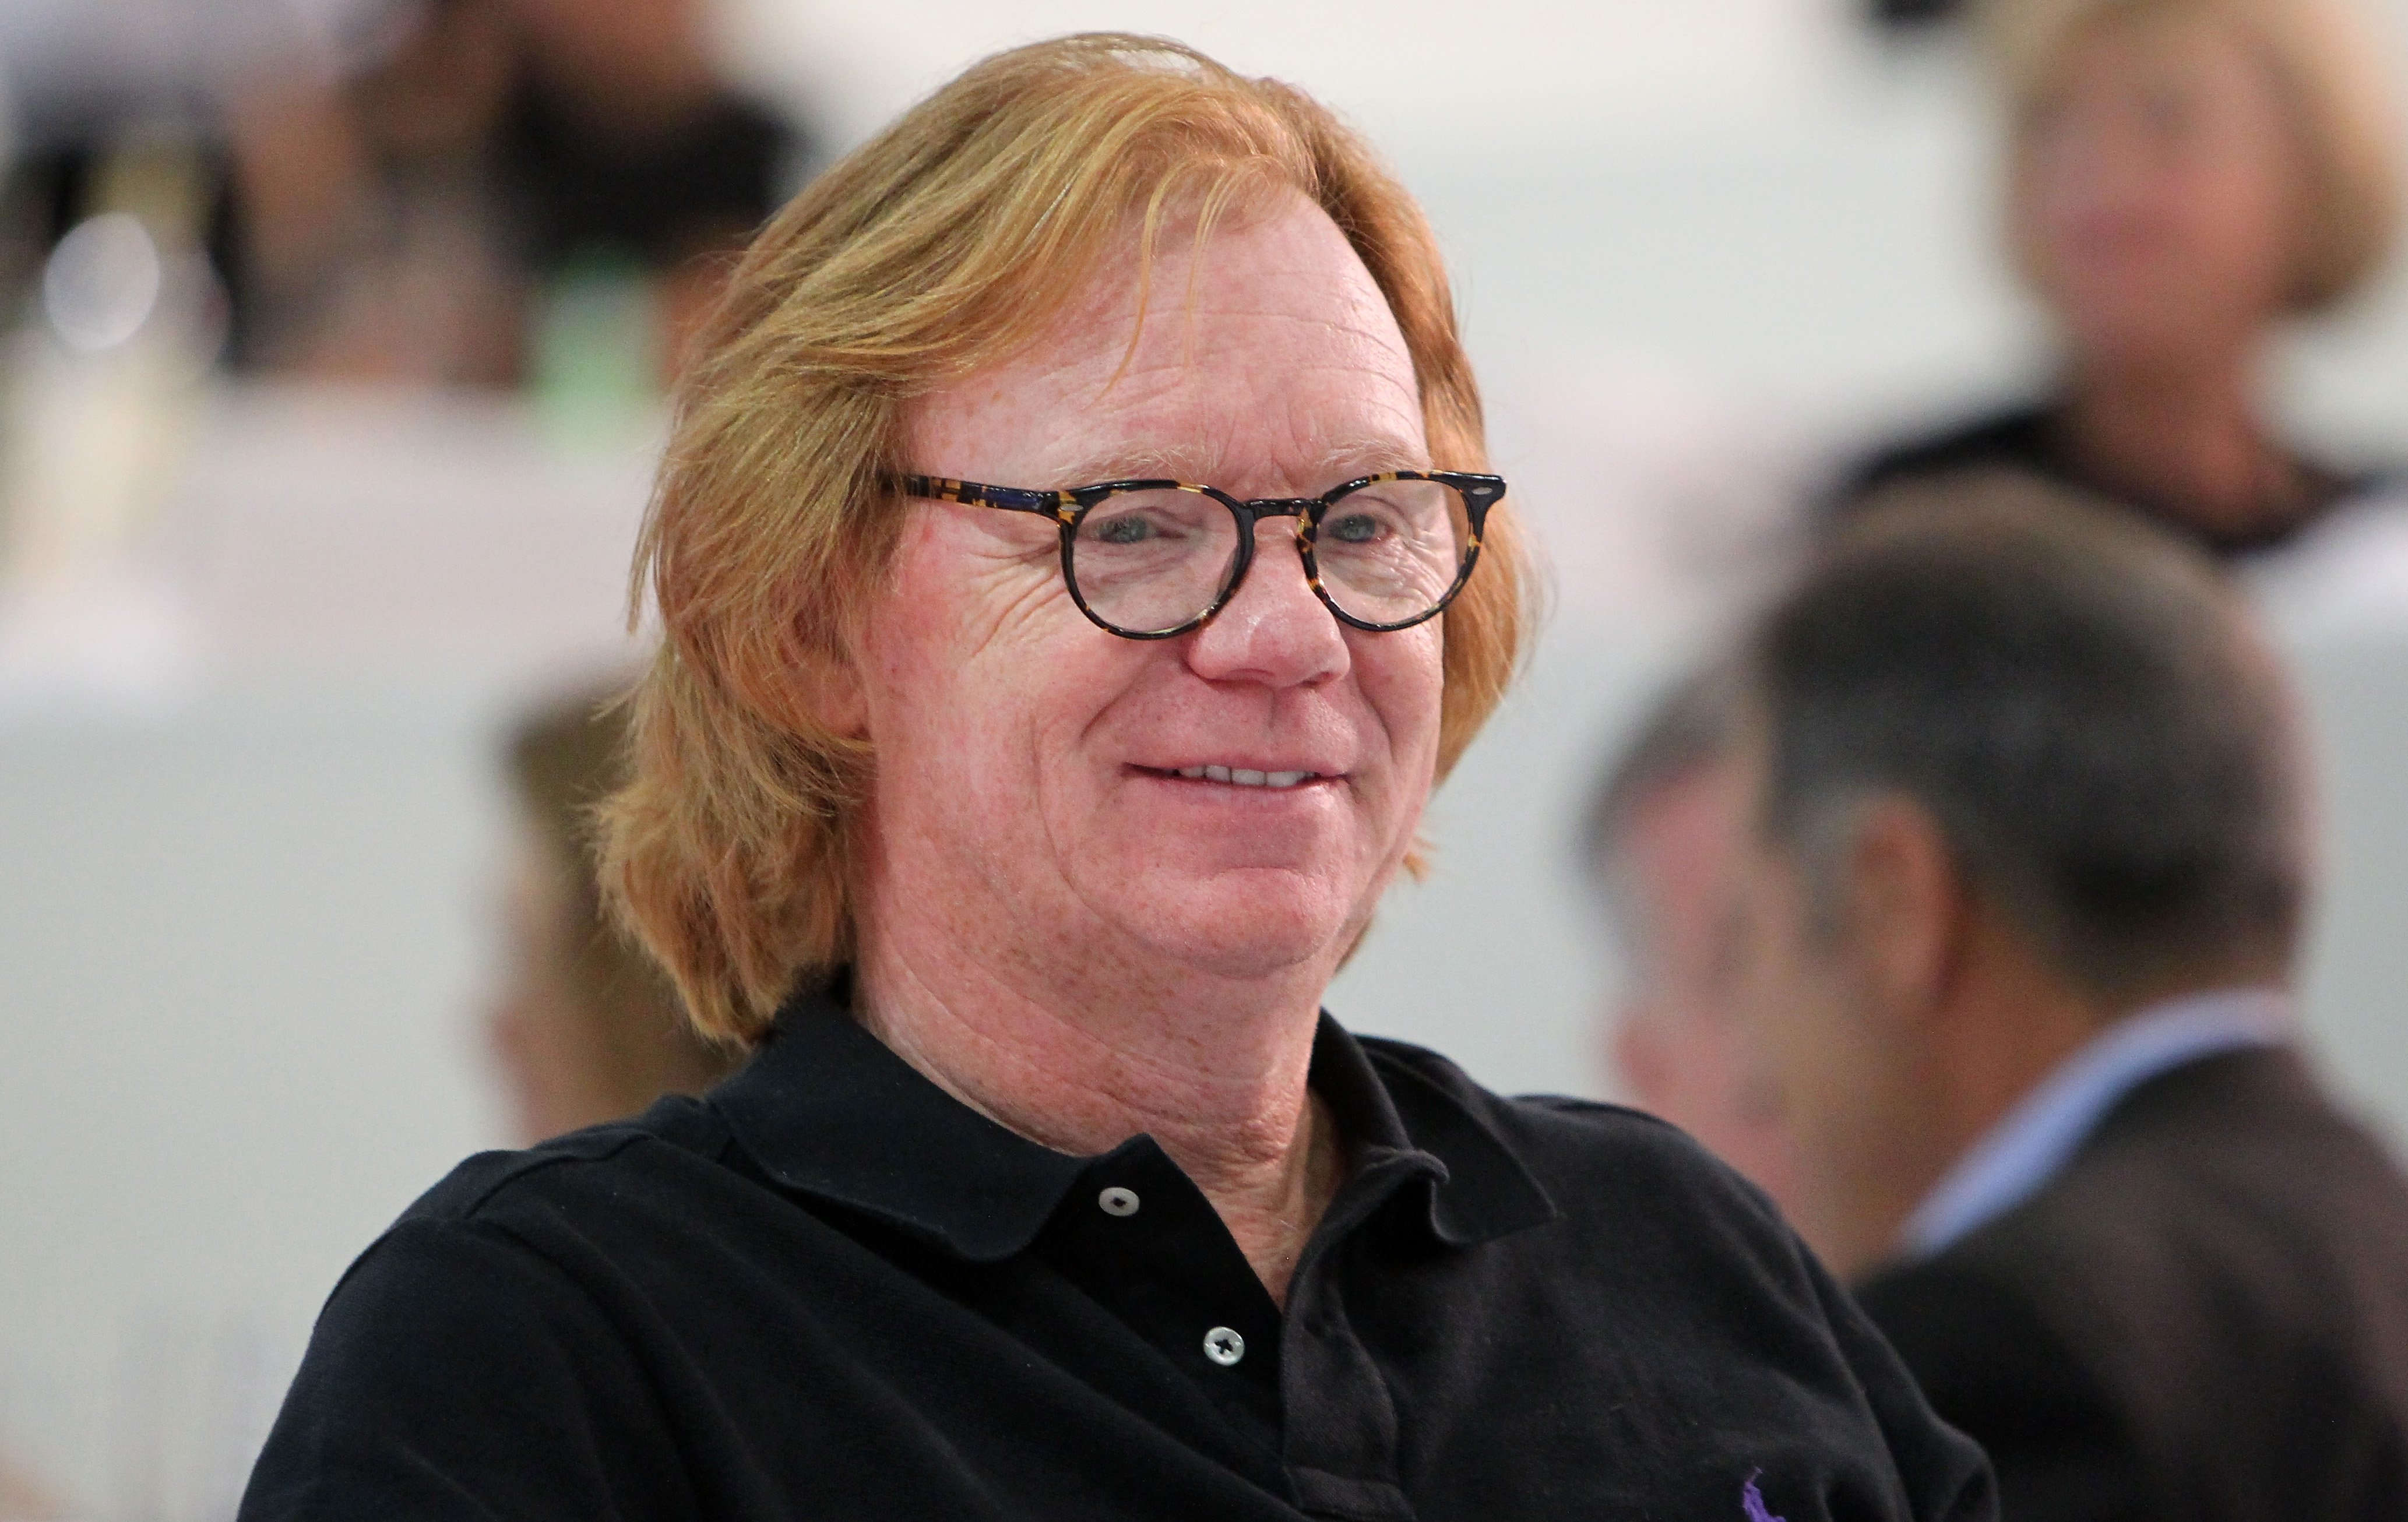 David Caruso at the Longines Grand Prix class event at Los Angeles Convention Center on September 28, 2014. | Source: Getty Images